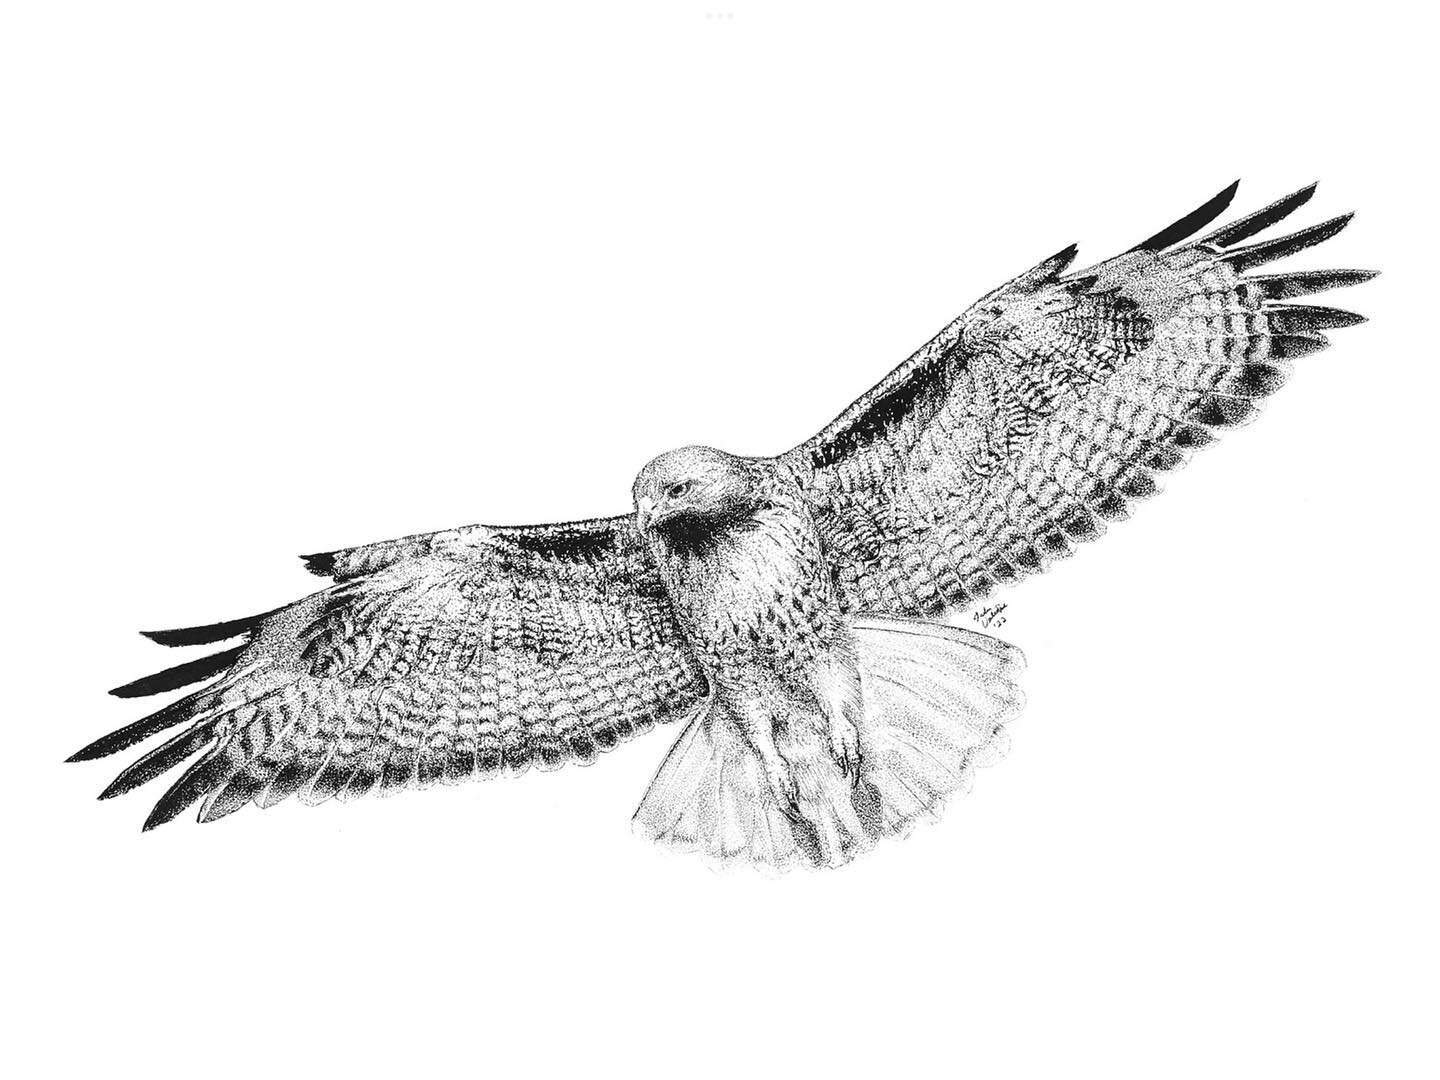 Fierce Red-tailed Hawk! I&rsquo;ll be unveiling my new website soon where you can directly buy a print. 
.
.
.
.
.
#localartist #bird #artistofinstagram #redtailedhawk #pendrawing #art #idaho #idahoartist #birds #buylocalart #buylocal